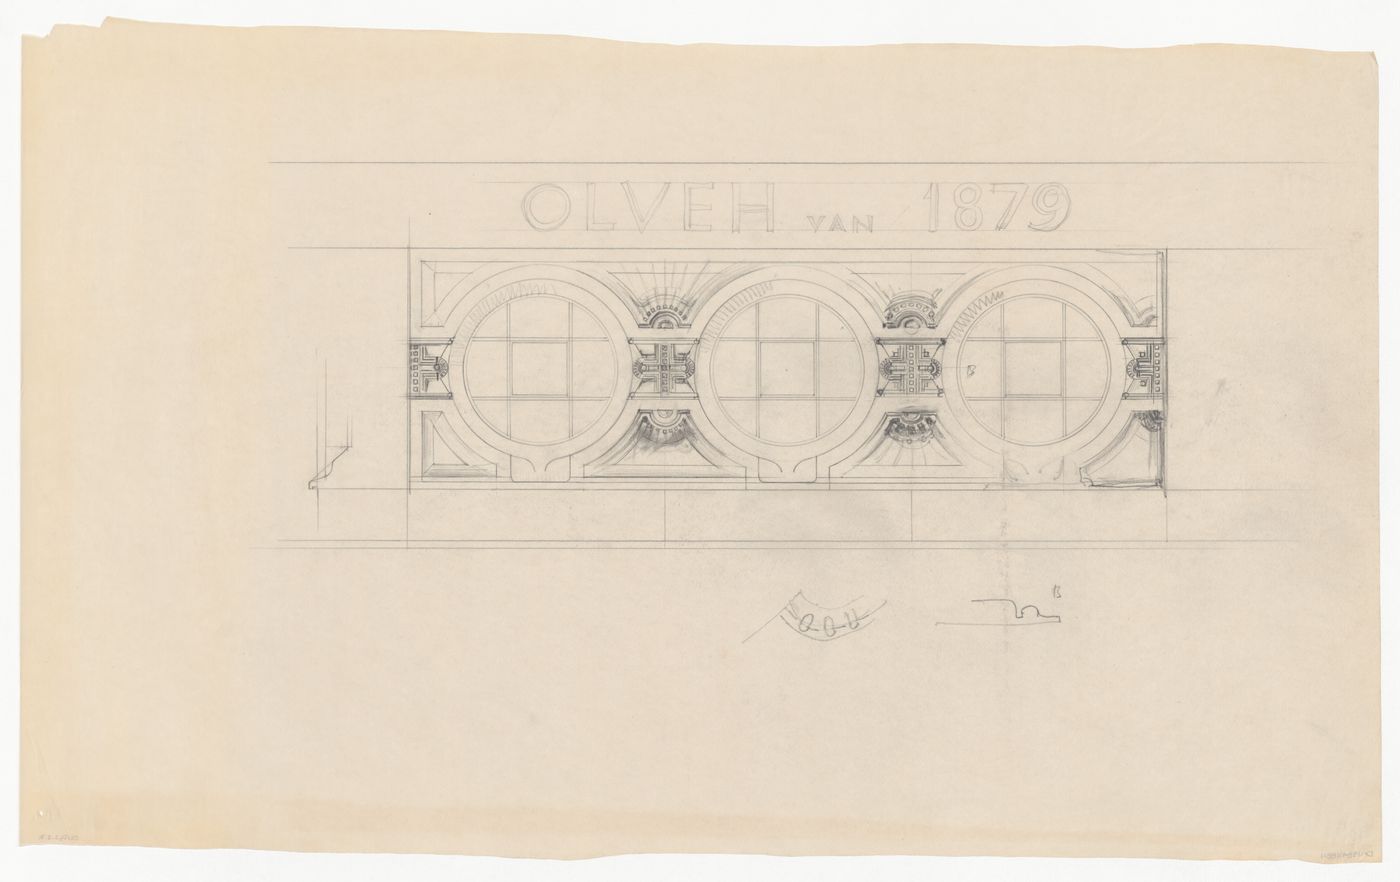 Elevation and details for windows [?], moldings and lettering for Olveh mixed-use development, Rotterdam, Netherlands